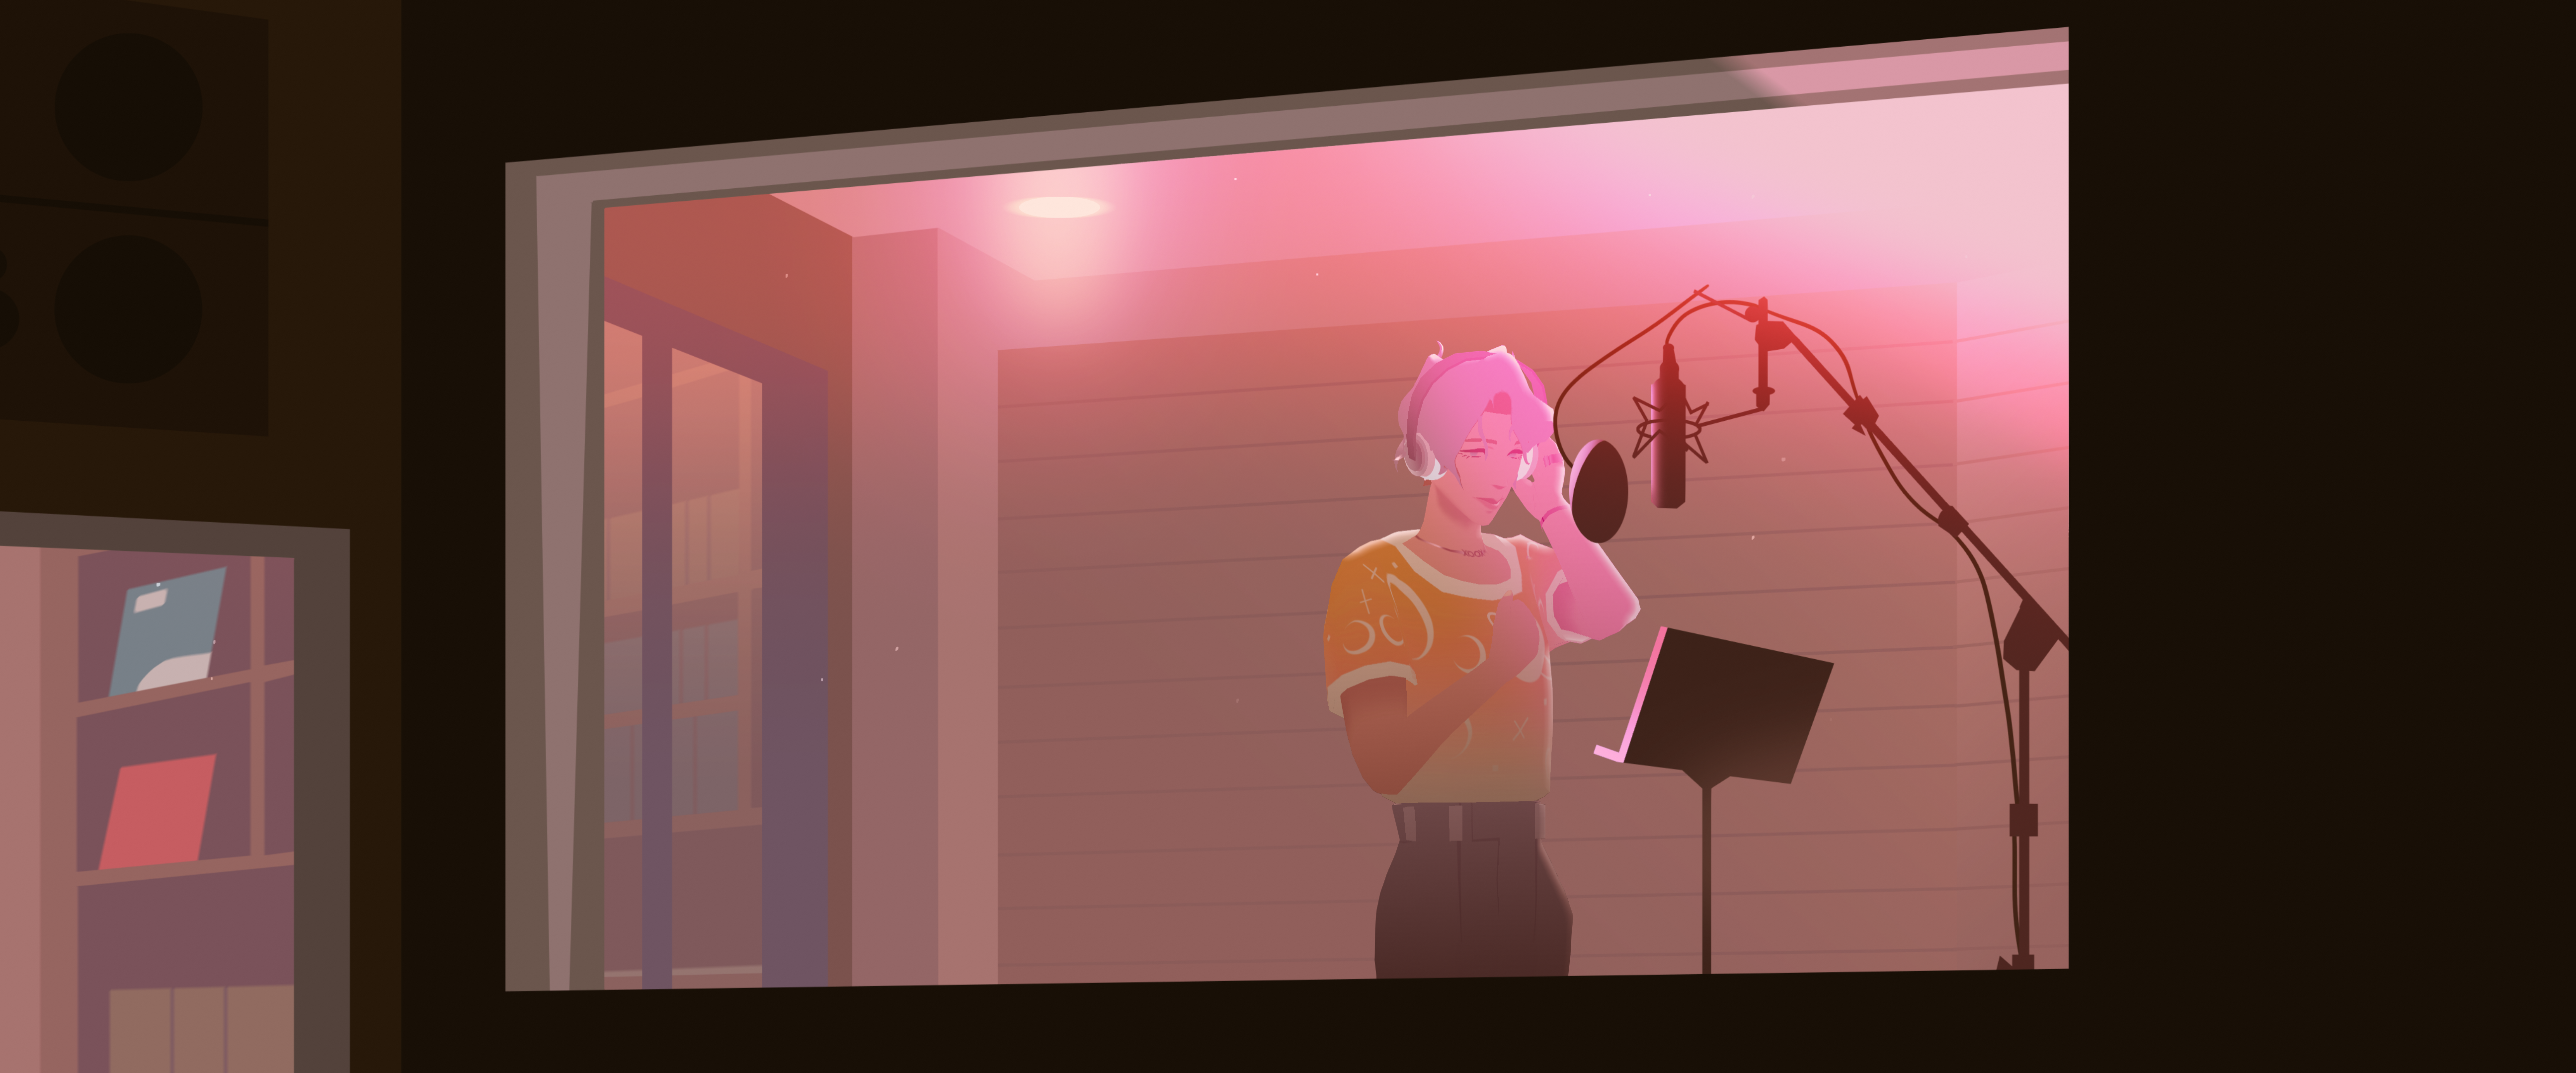 We Are OFK screenshot of Luca singing in a recording booth